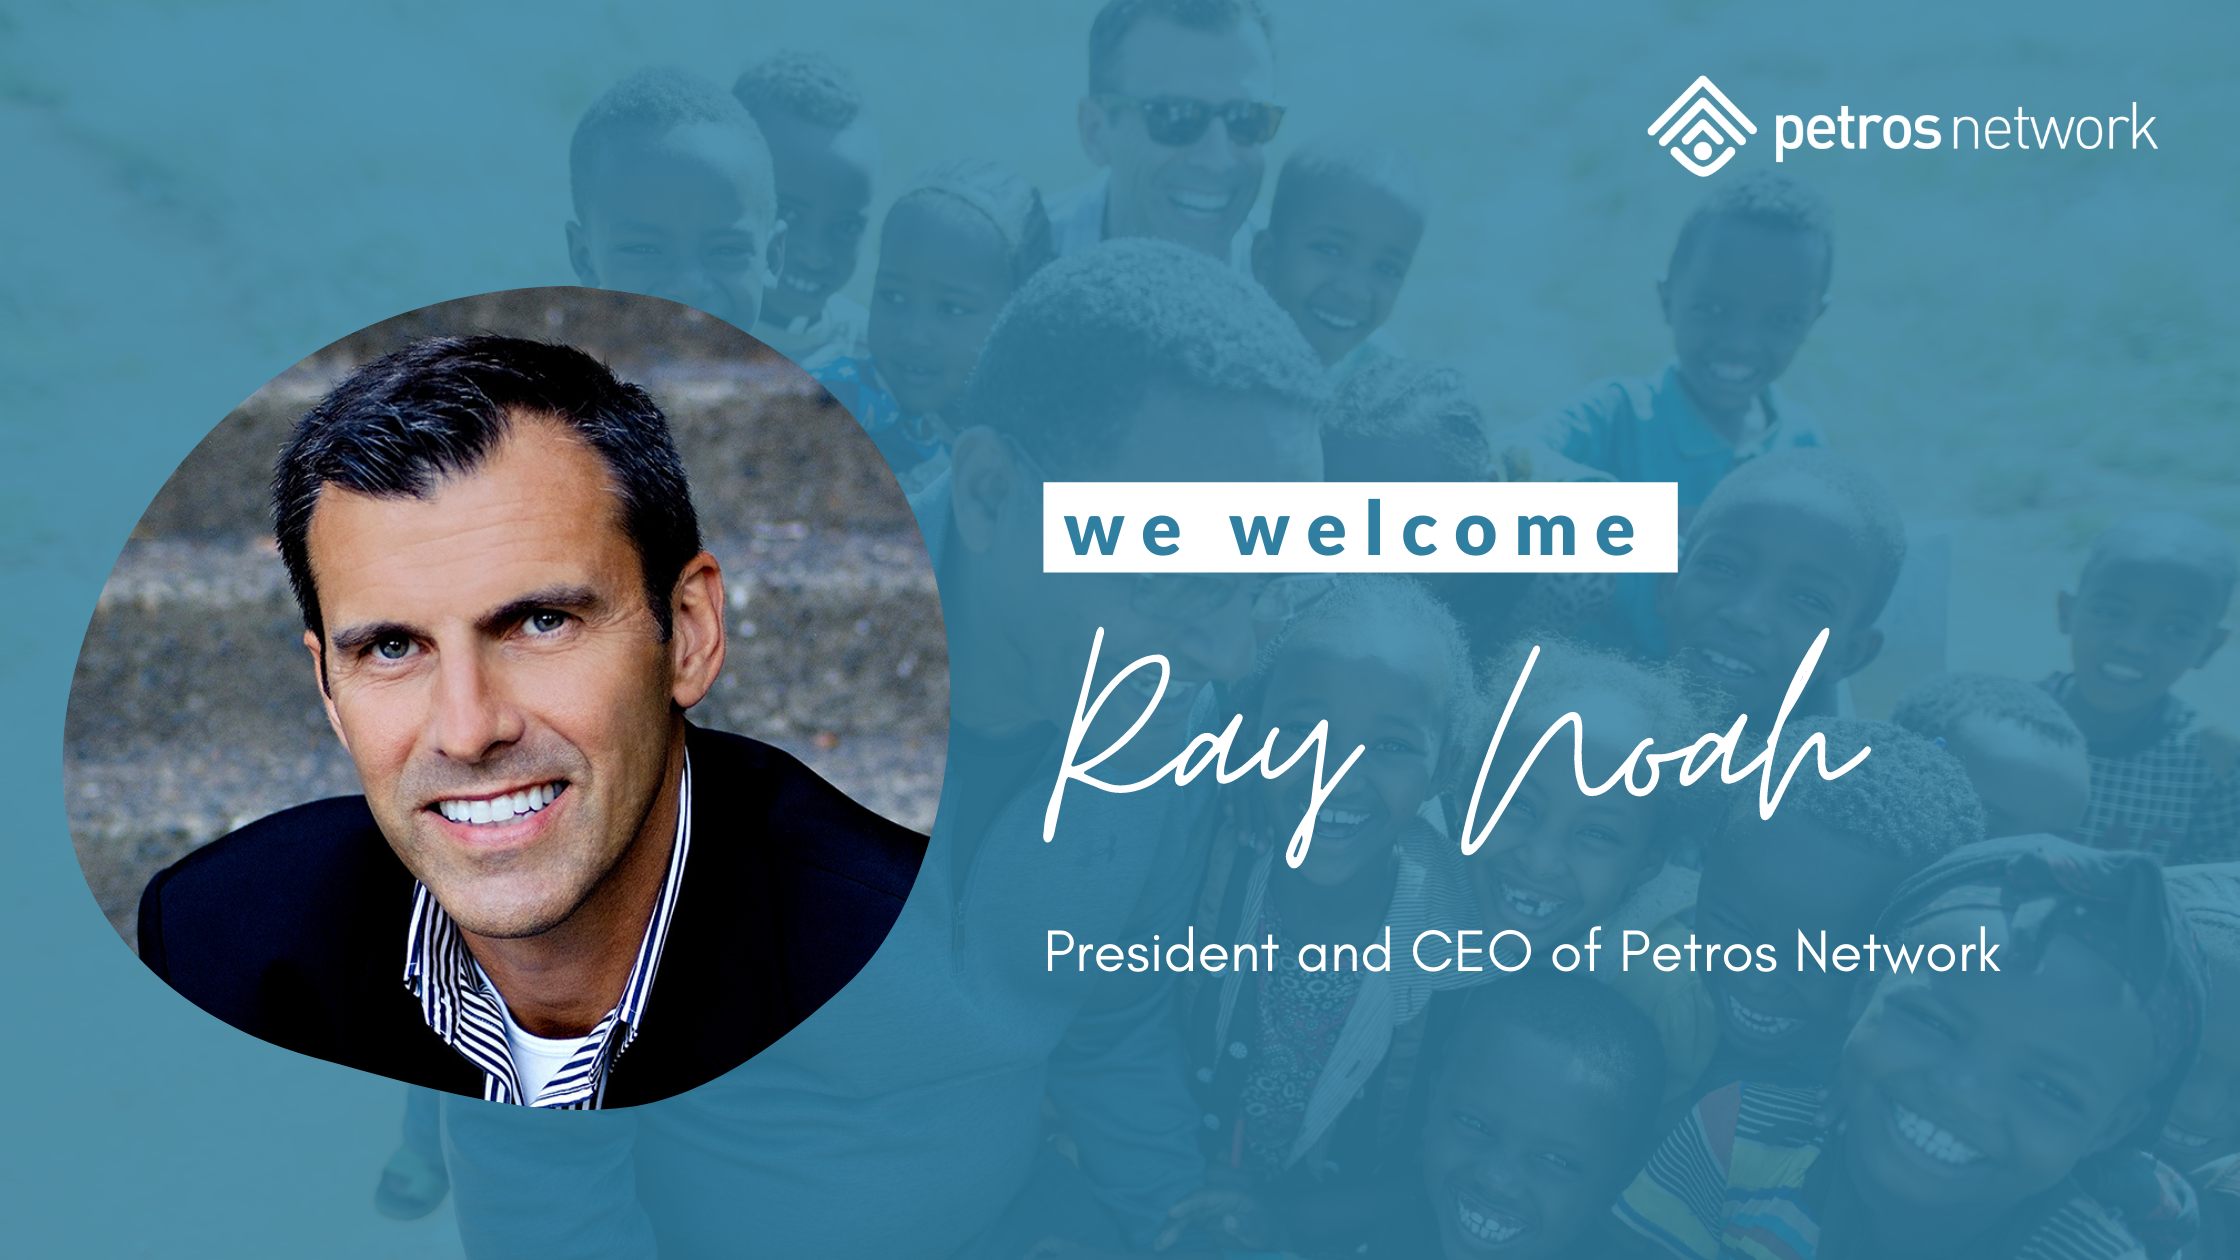 Ray Noah join Petros Network in a full-time capacity as President and CEO.